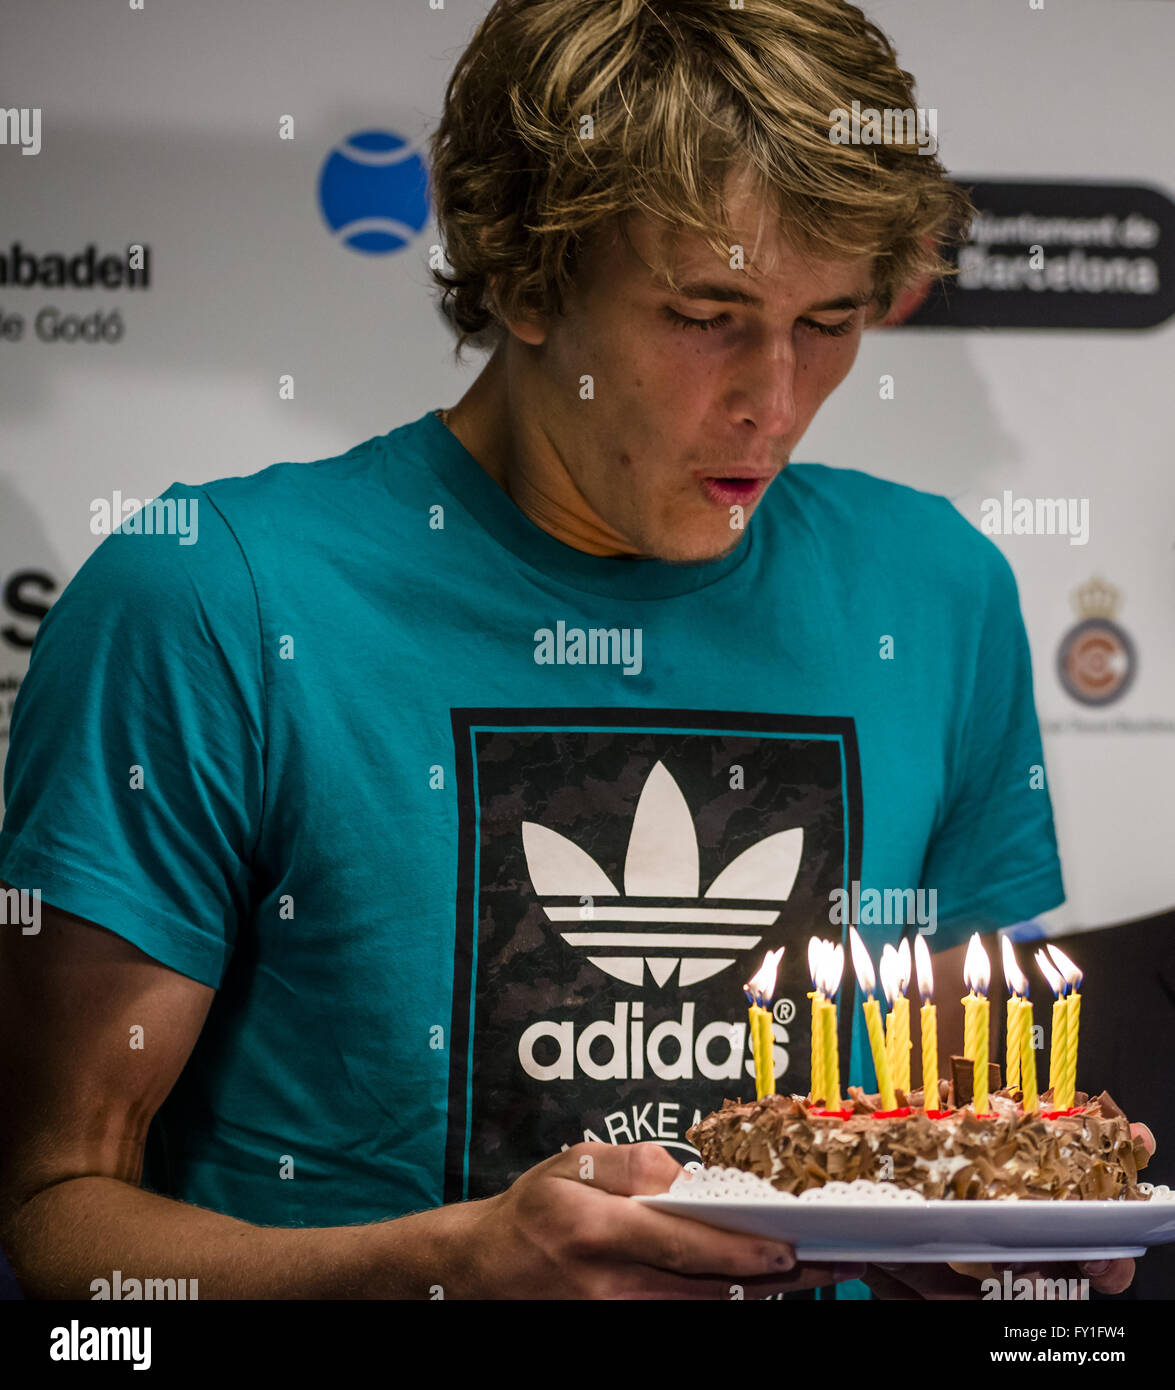 Barcelona, Catalonia, Spain. 20th Apr, 2016. ALEXANDER ZVEREV (GER)  receives a birthday cake for his 19th birthday during a press conference  after his victory over Thomaz Belluci (BRA) during the 2nd round